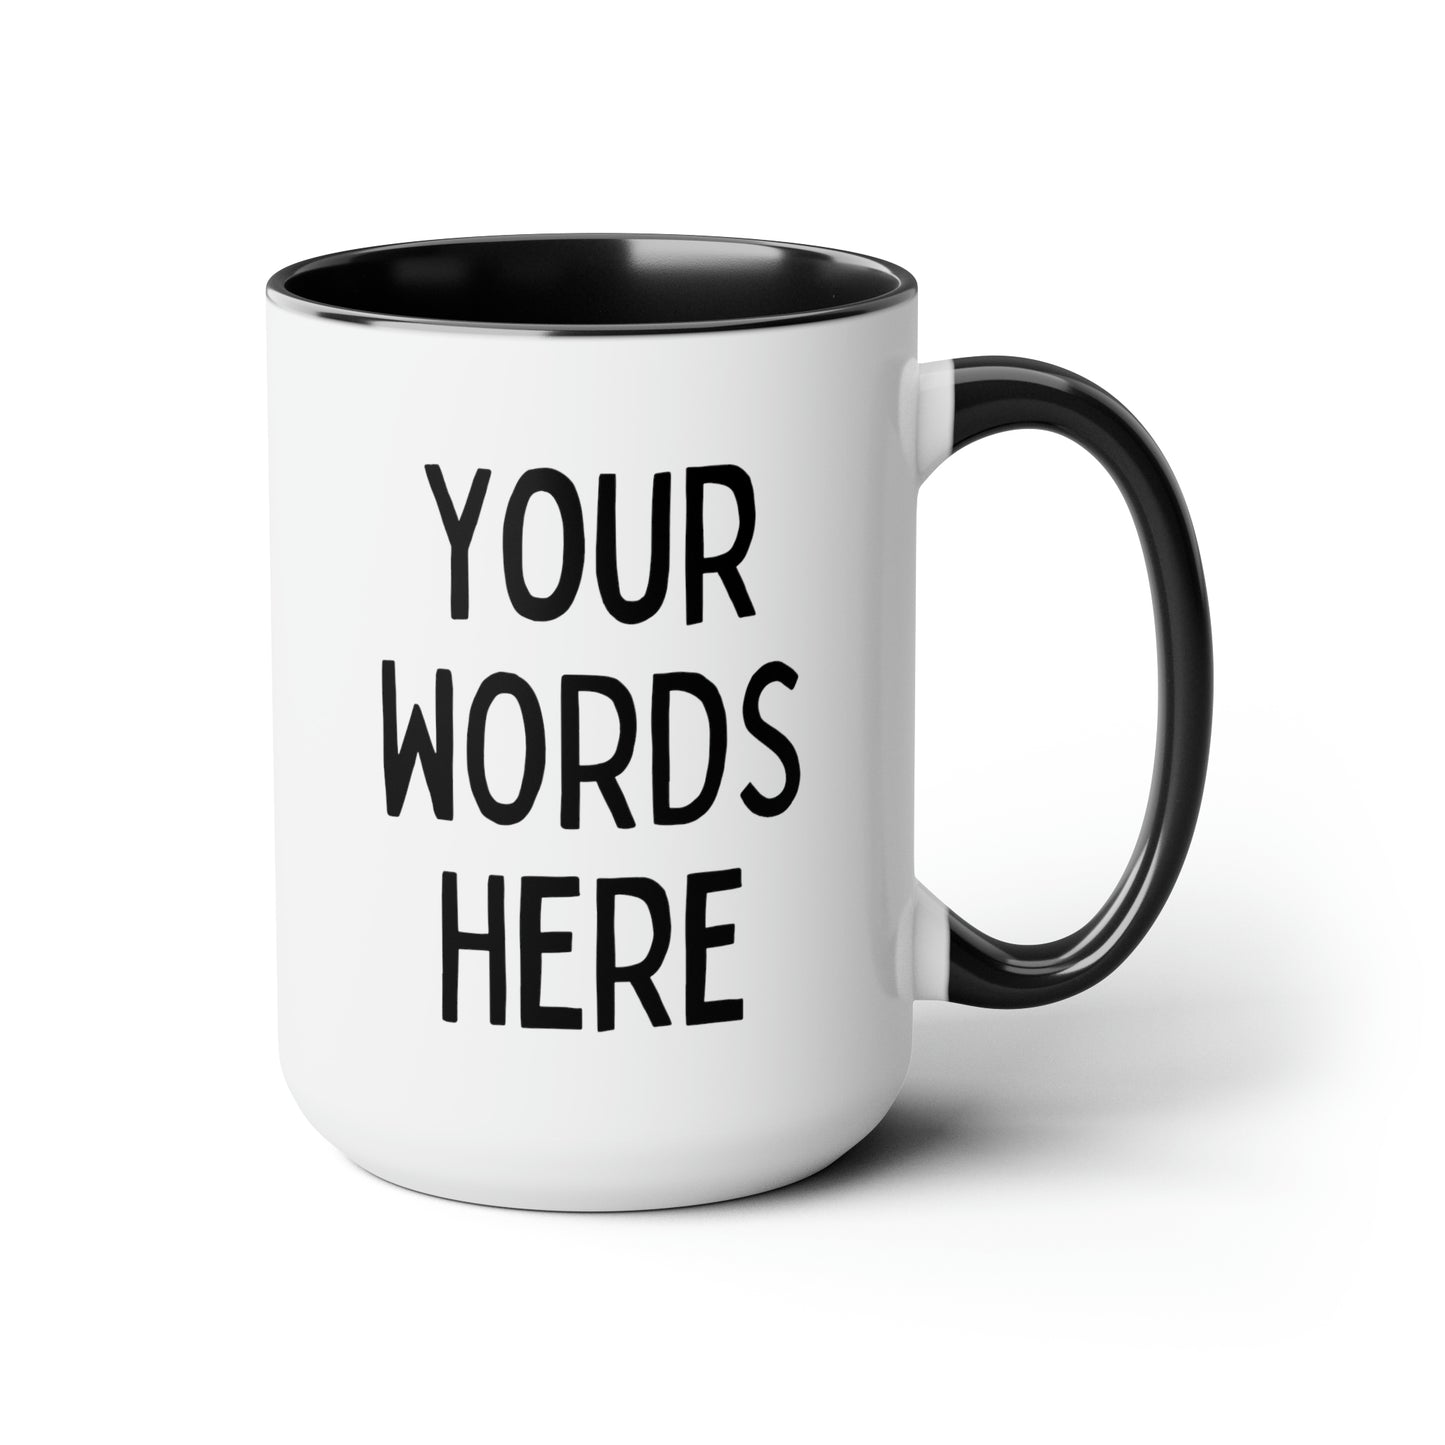 Add Your Text 15oz white with black accent funny large coffee mug gift for friend family create your own custom personalize customize waveywares wavey wares wavywares wavy wares